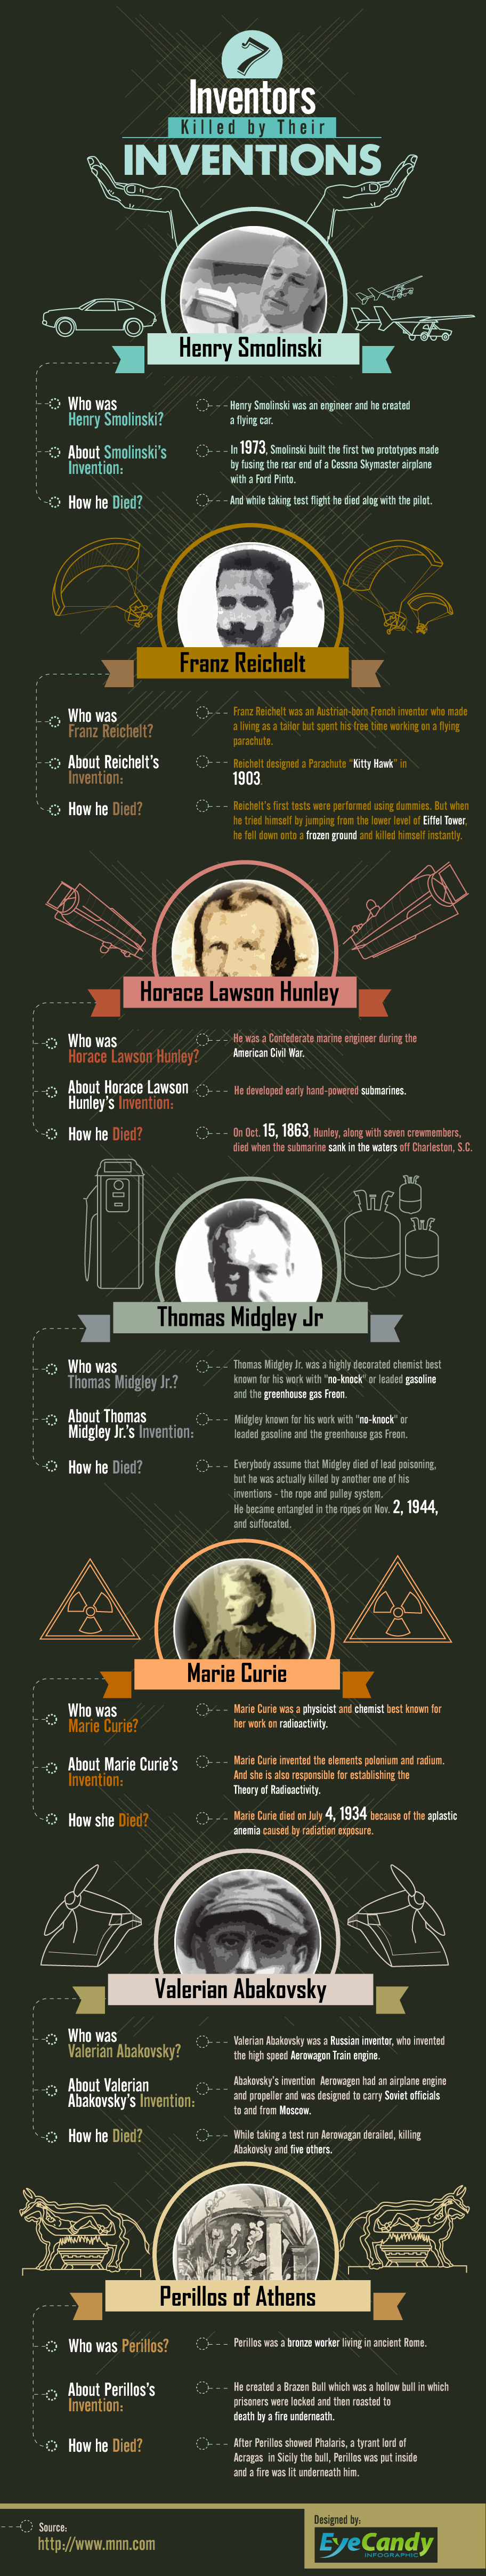 7 Inventors Killed by their Inventions